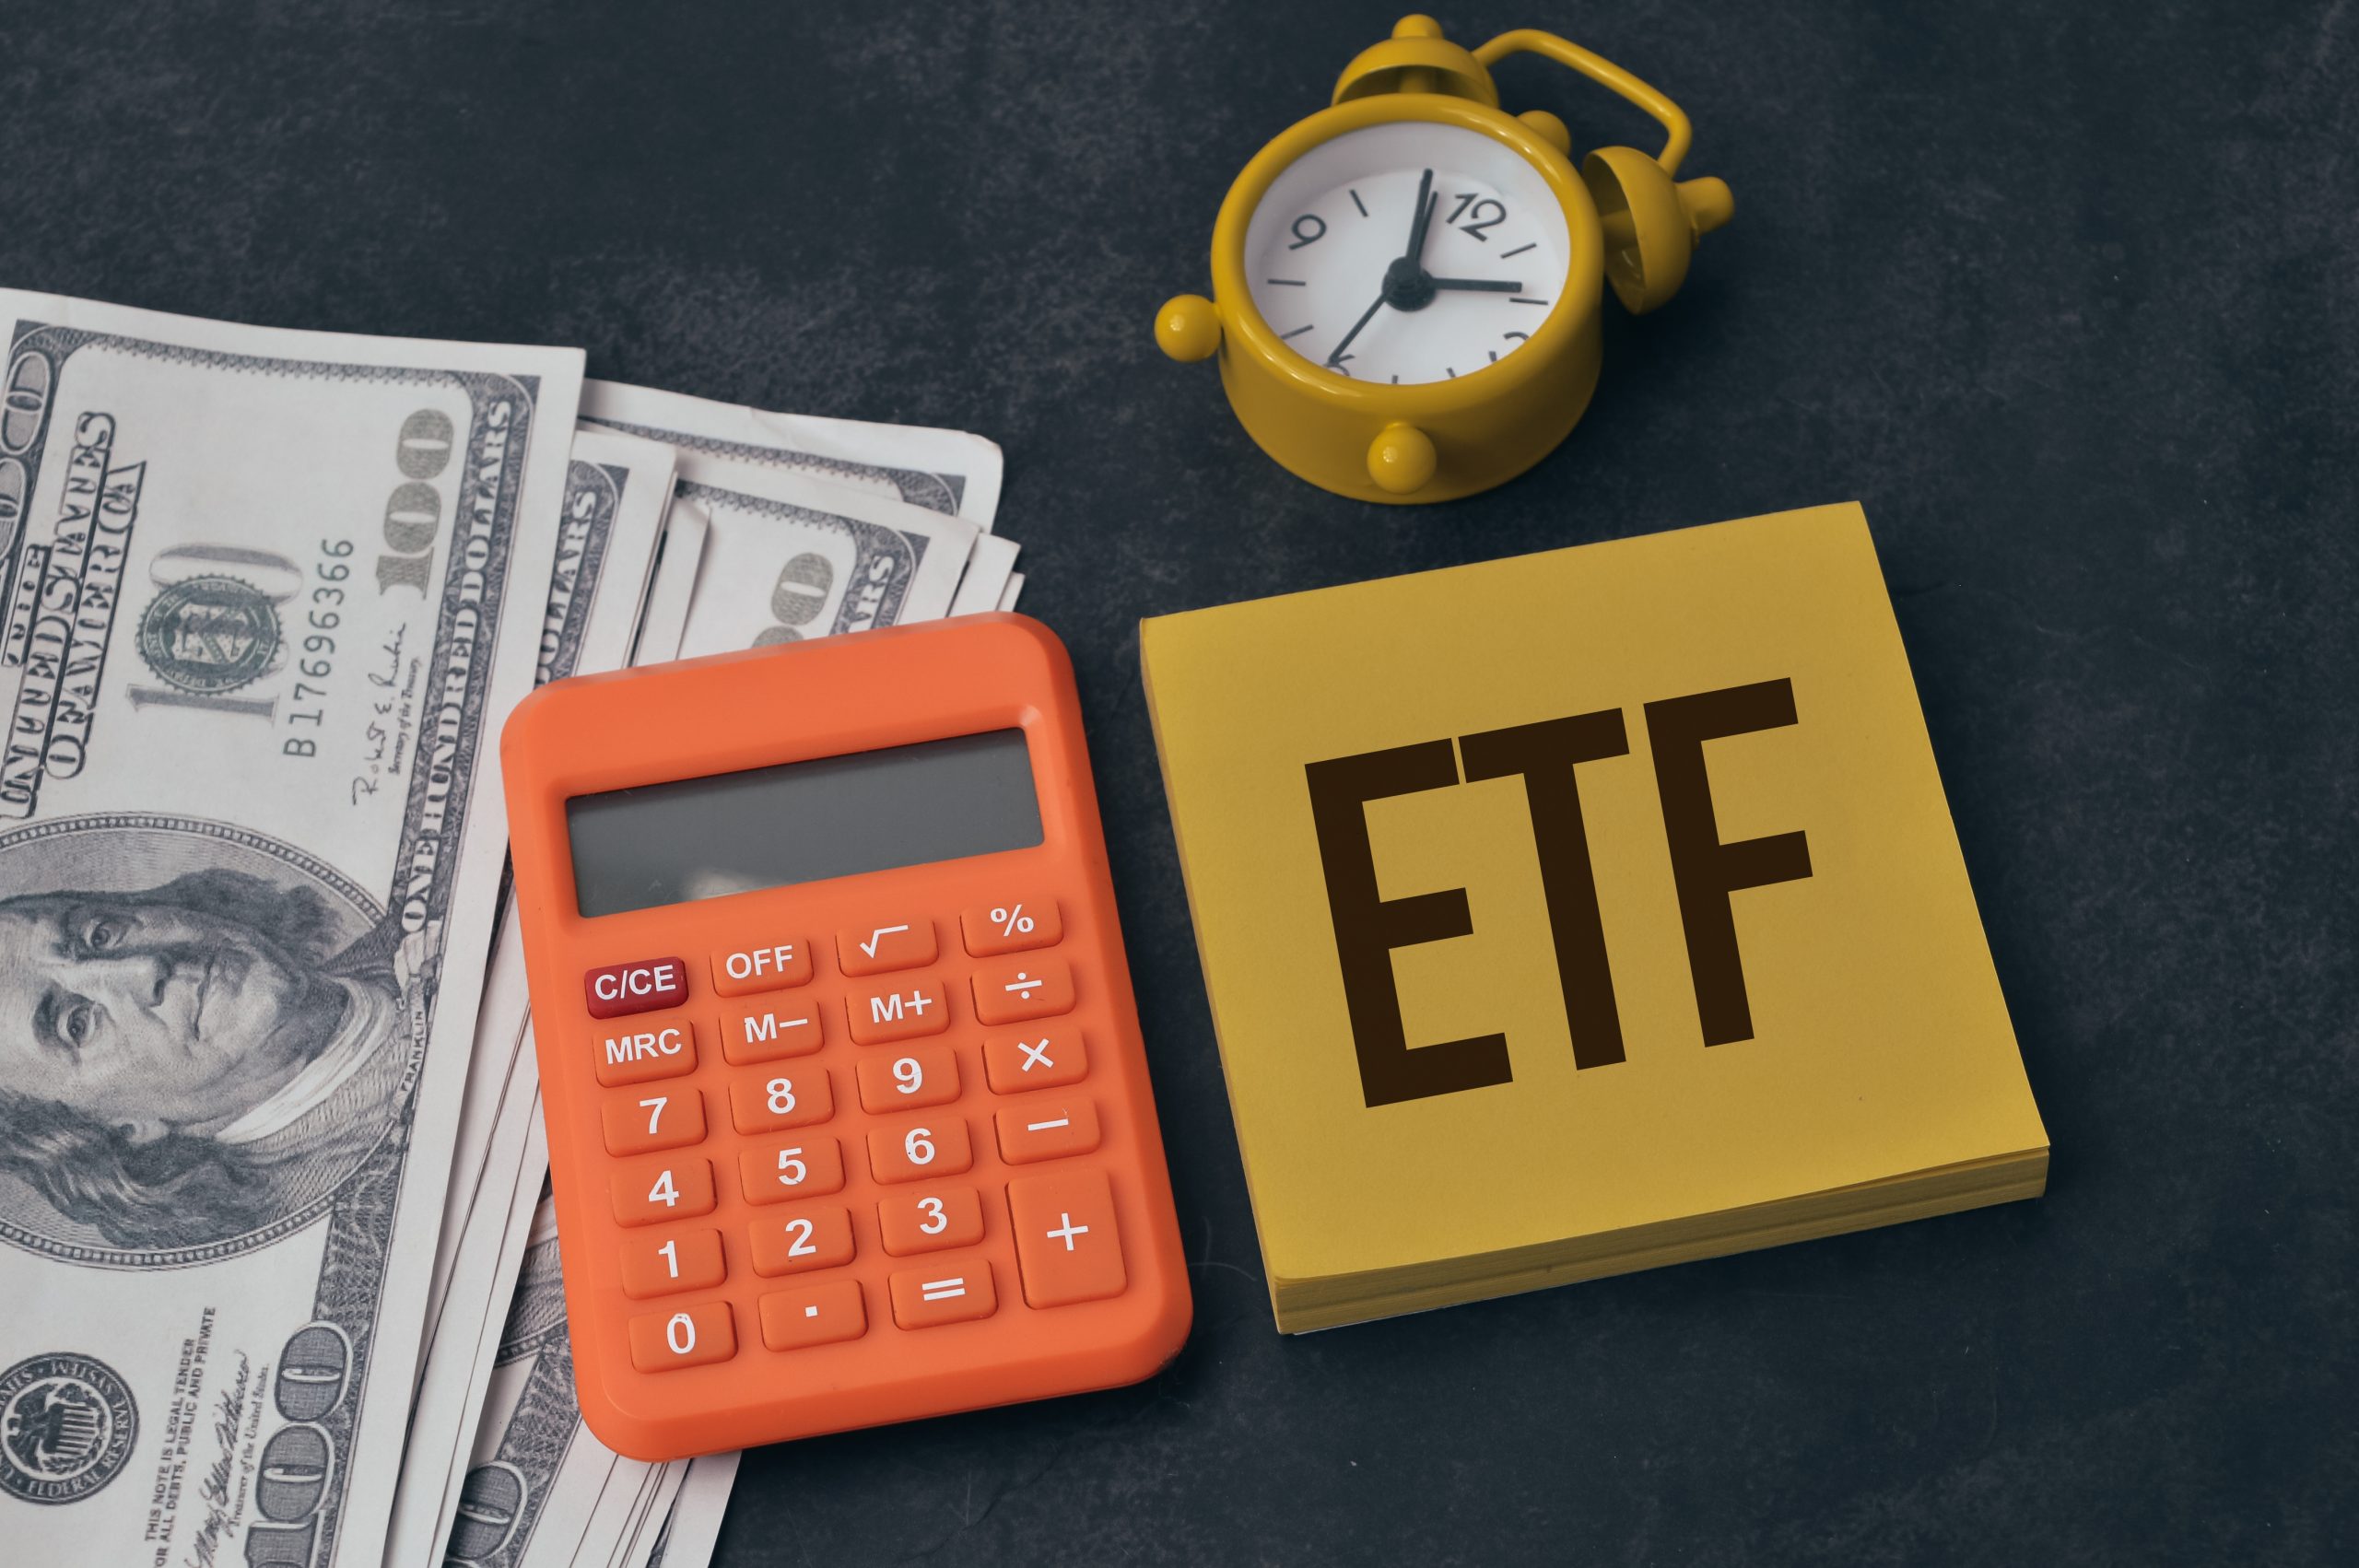 ETF stands for EXCHANGE TRADED FUND.